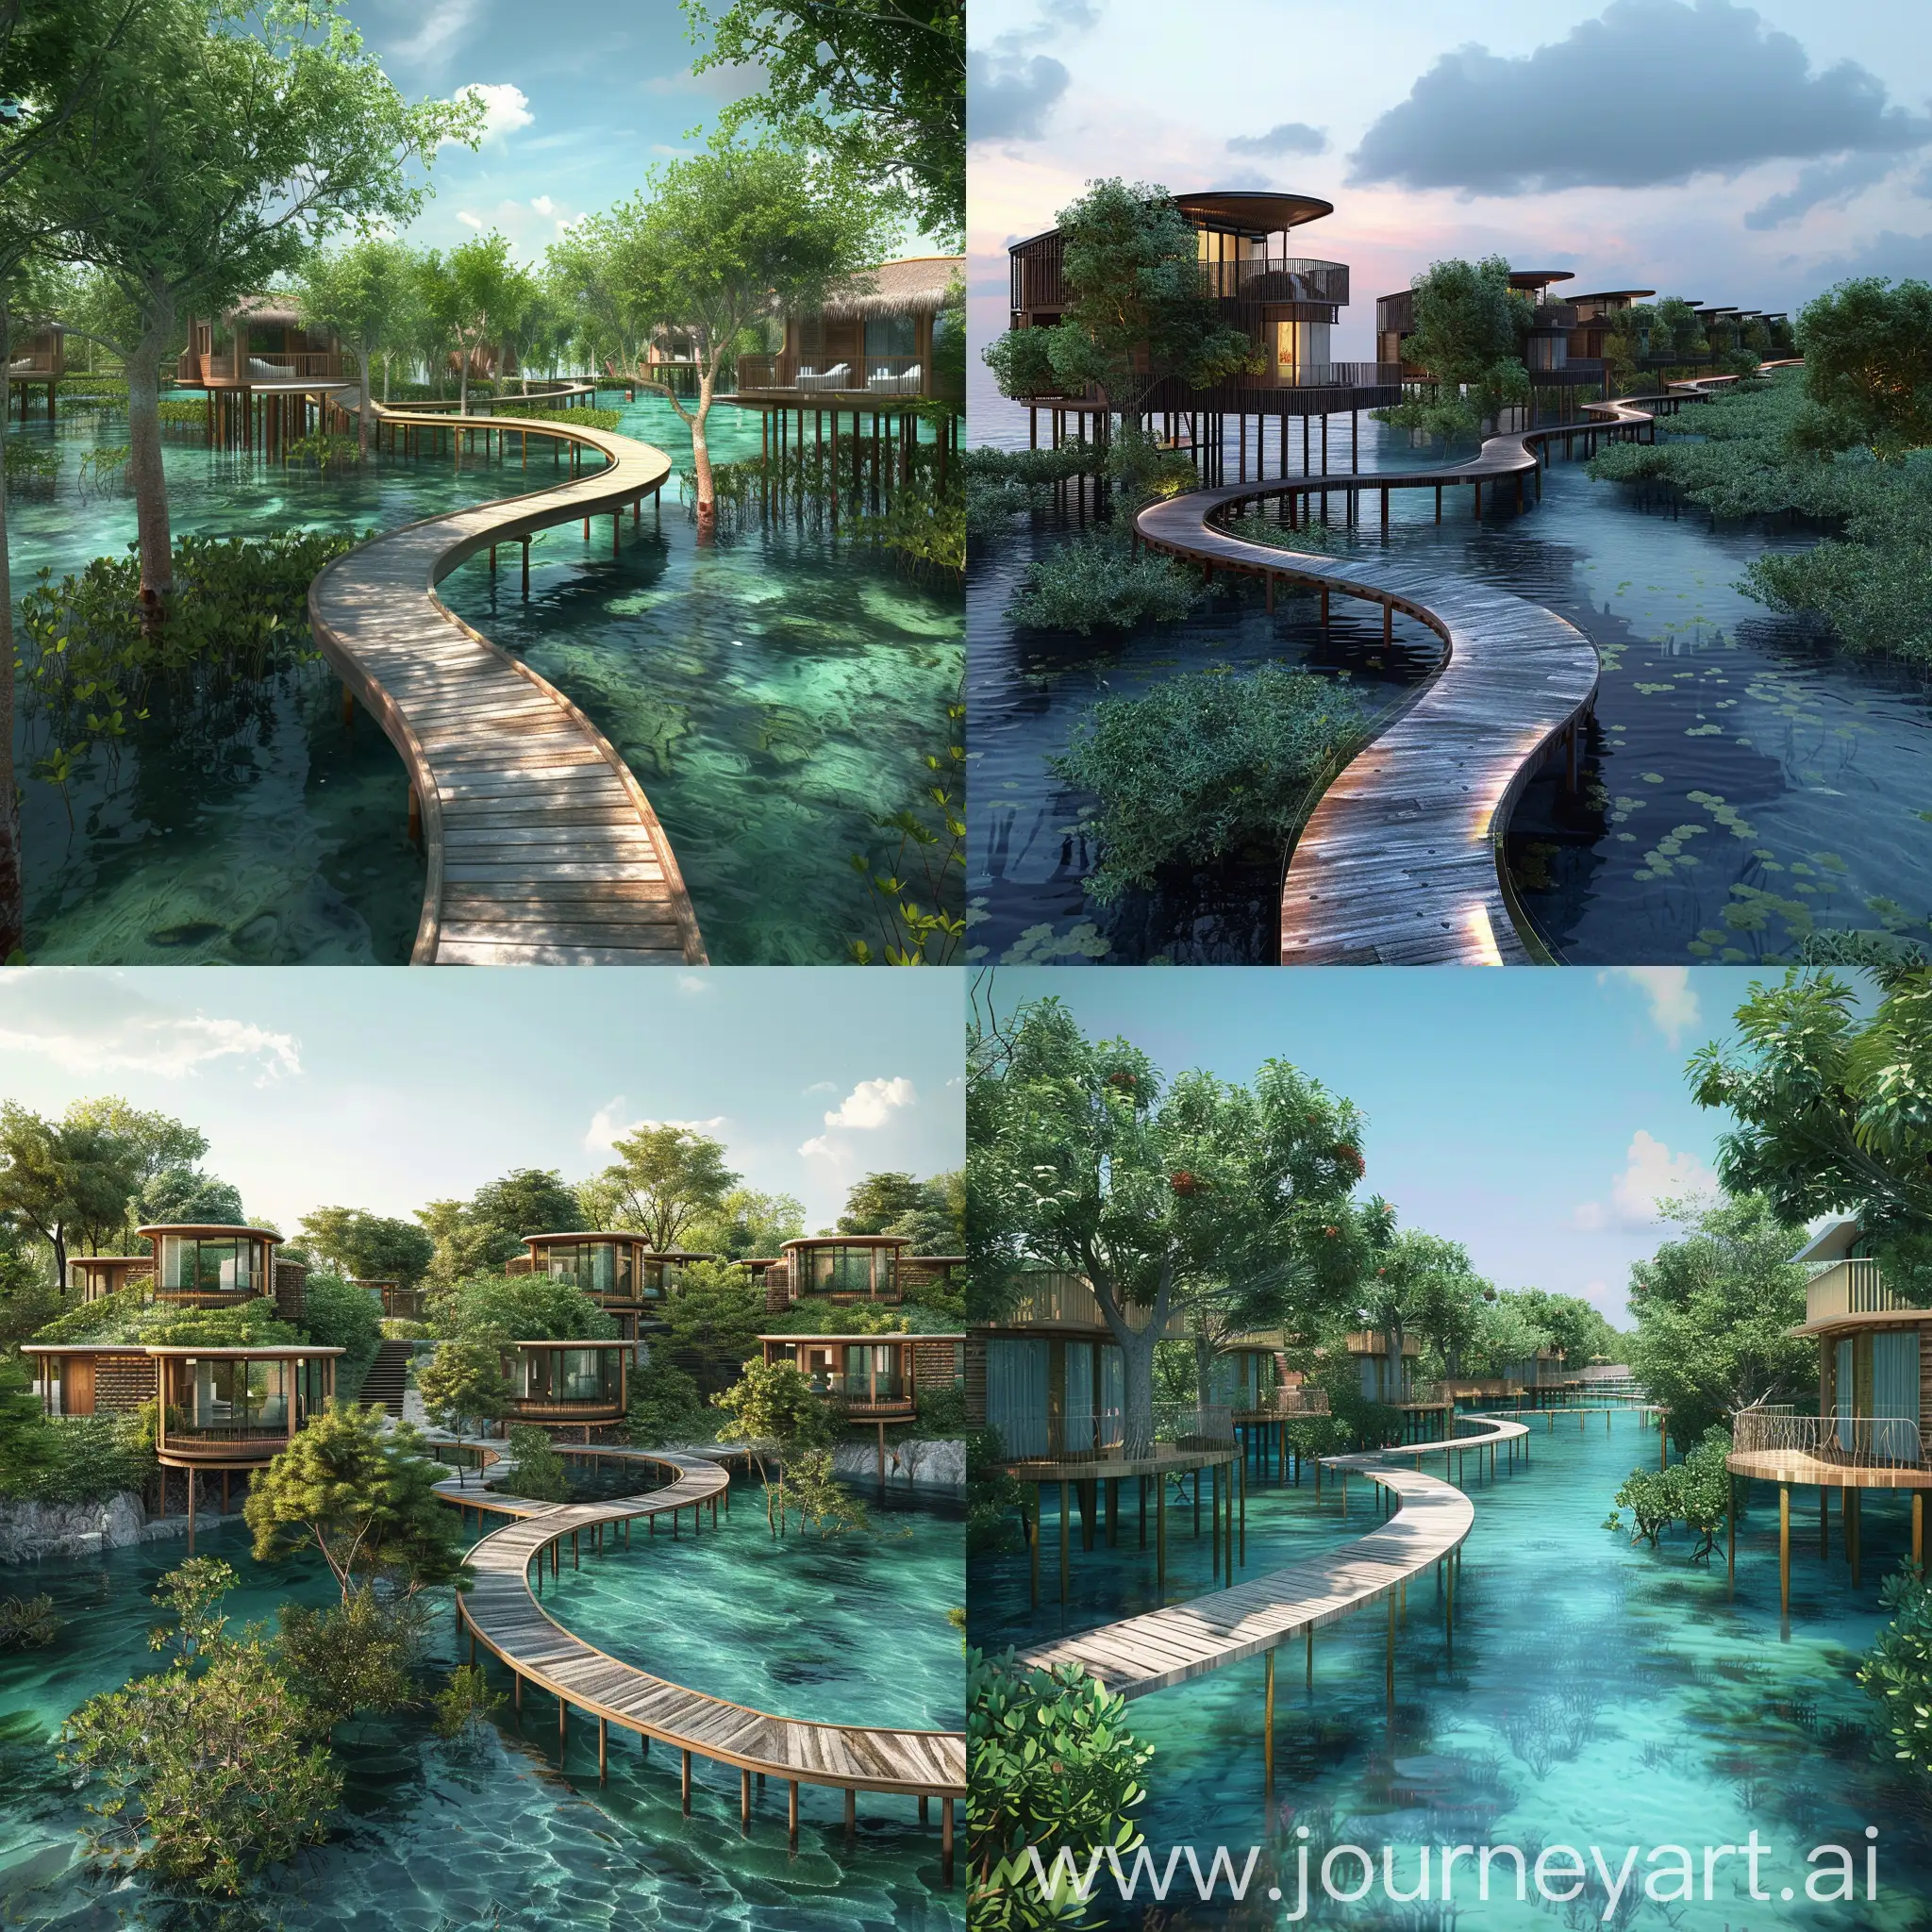 Can you create a pathways layout that is inspired from the mangrove forest  for a resort and hotel with villas that are elevated on a lagoon on different levels that makes you feel like you're taking a walk in a mangrove forest?